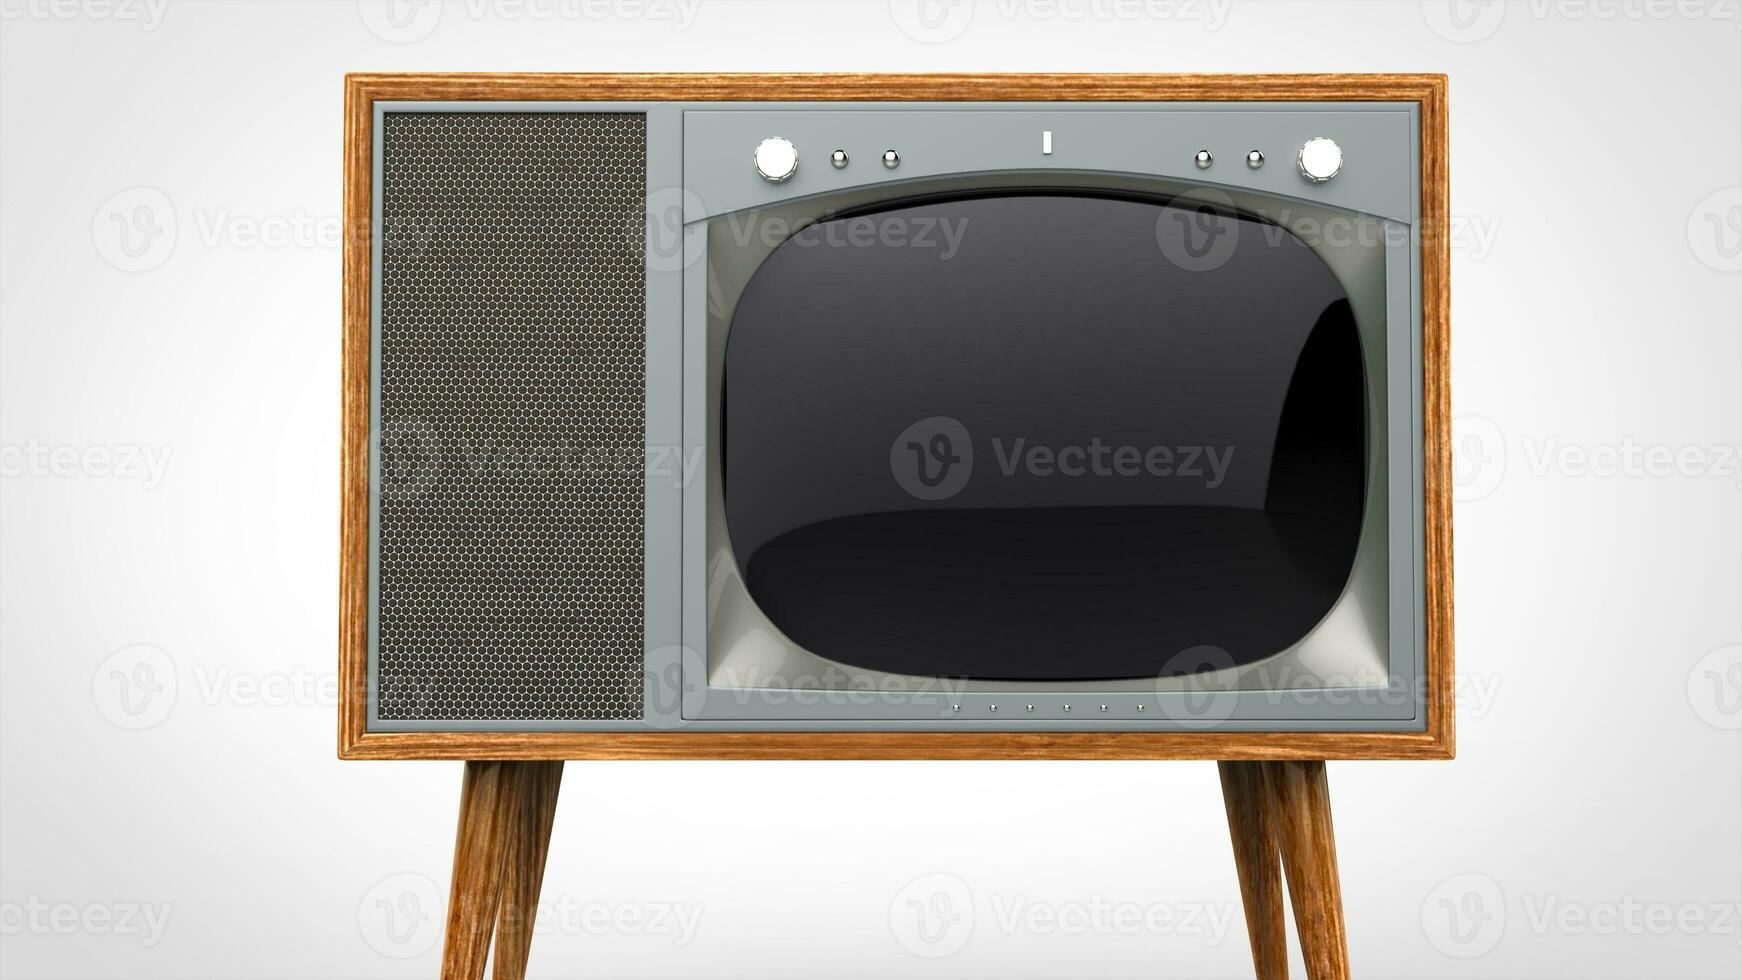 Wooden vintage TV set with silver front - closeup shot photo